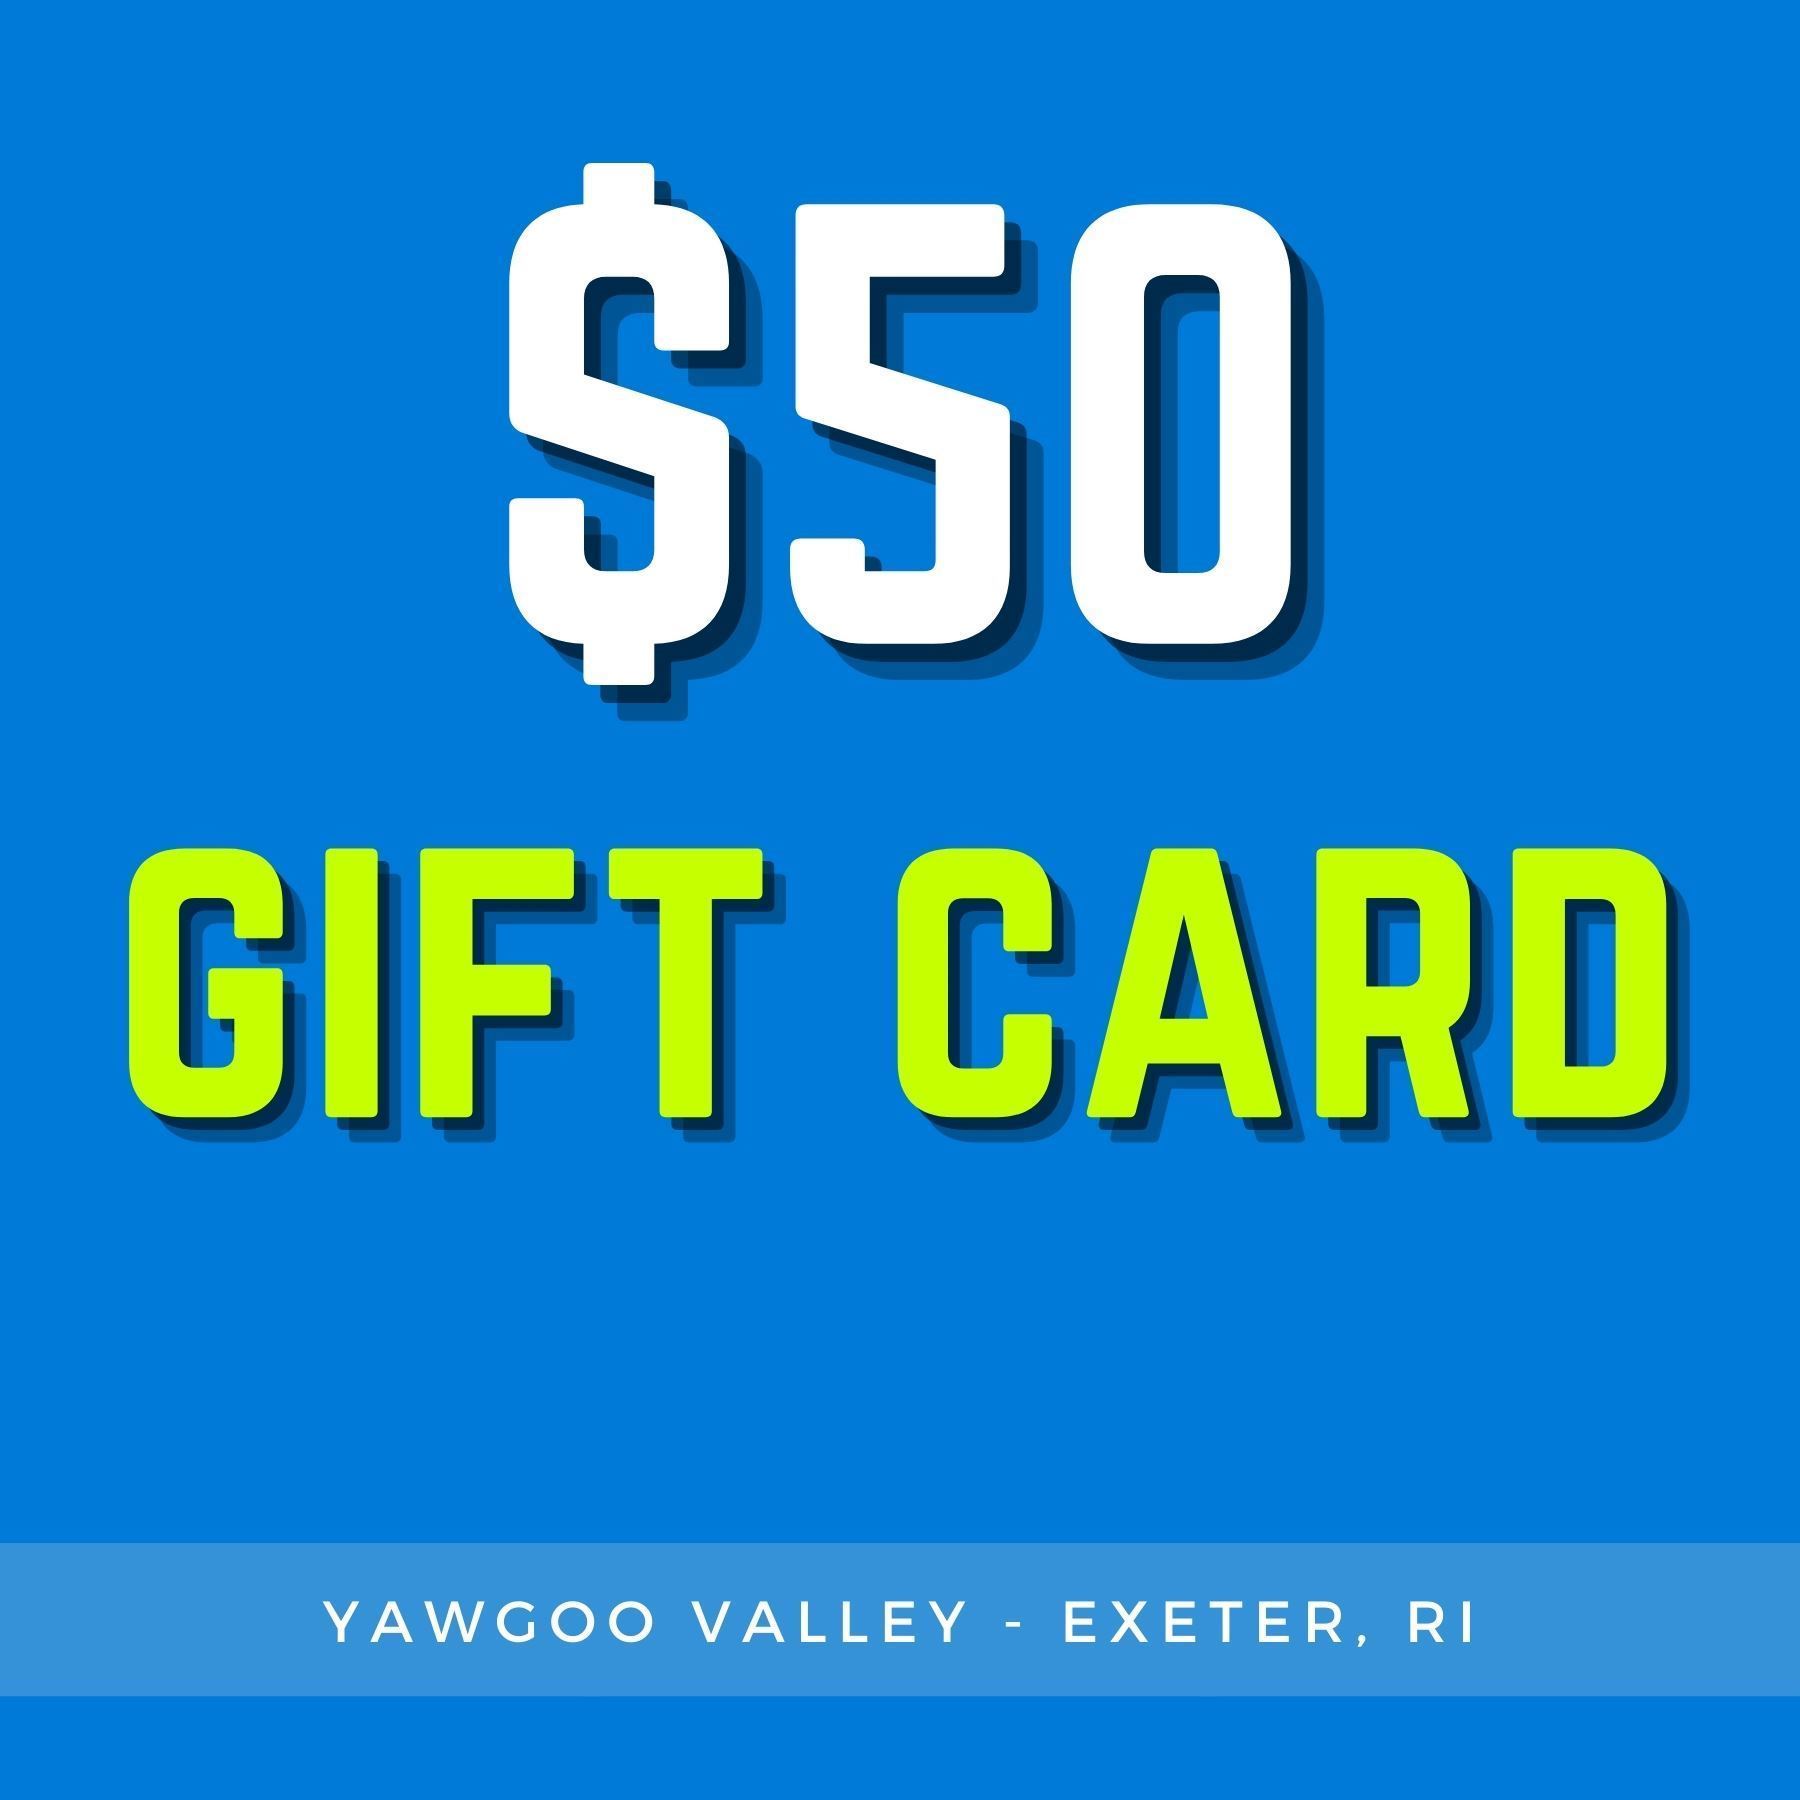 Yawgoo Valley Web Store Exeter, Rhode Island. 50 Gift Card